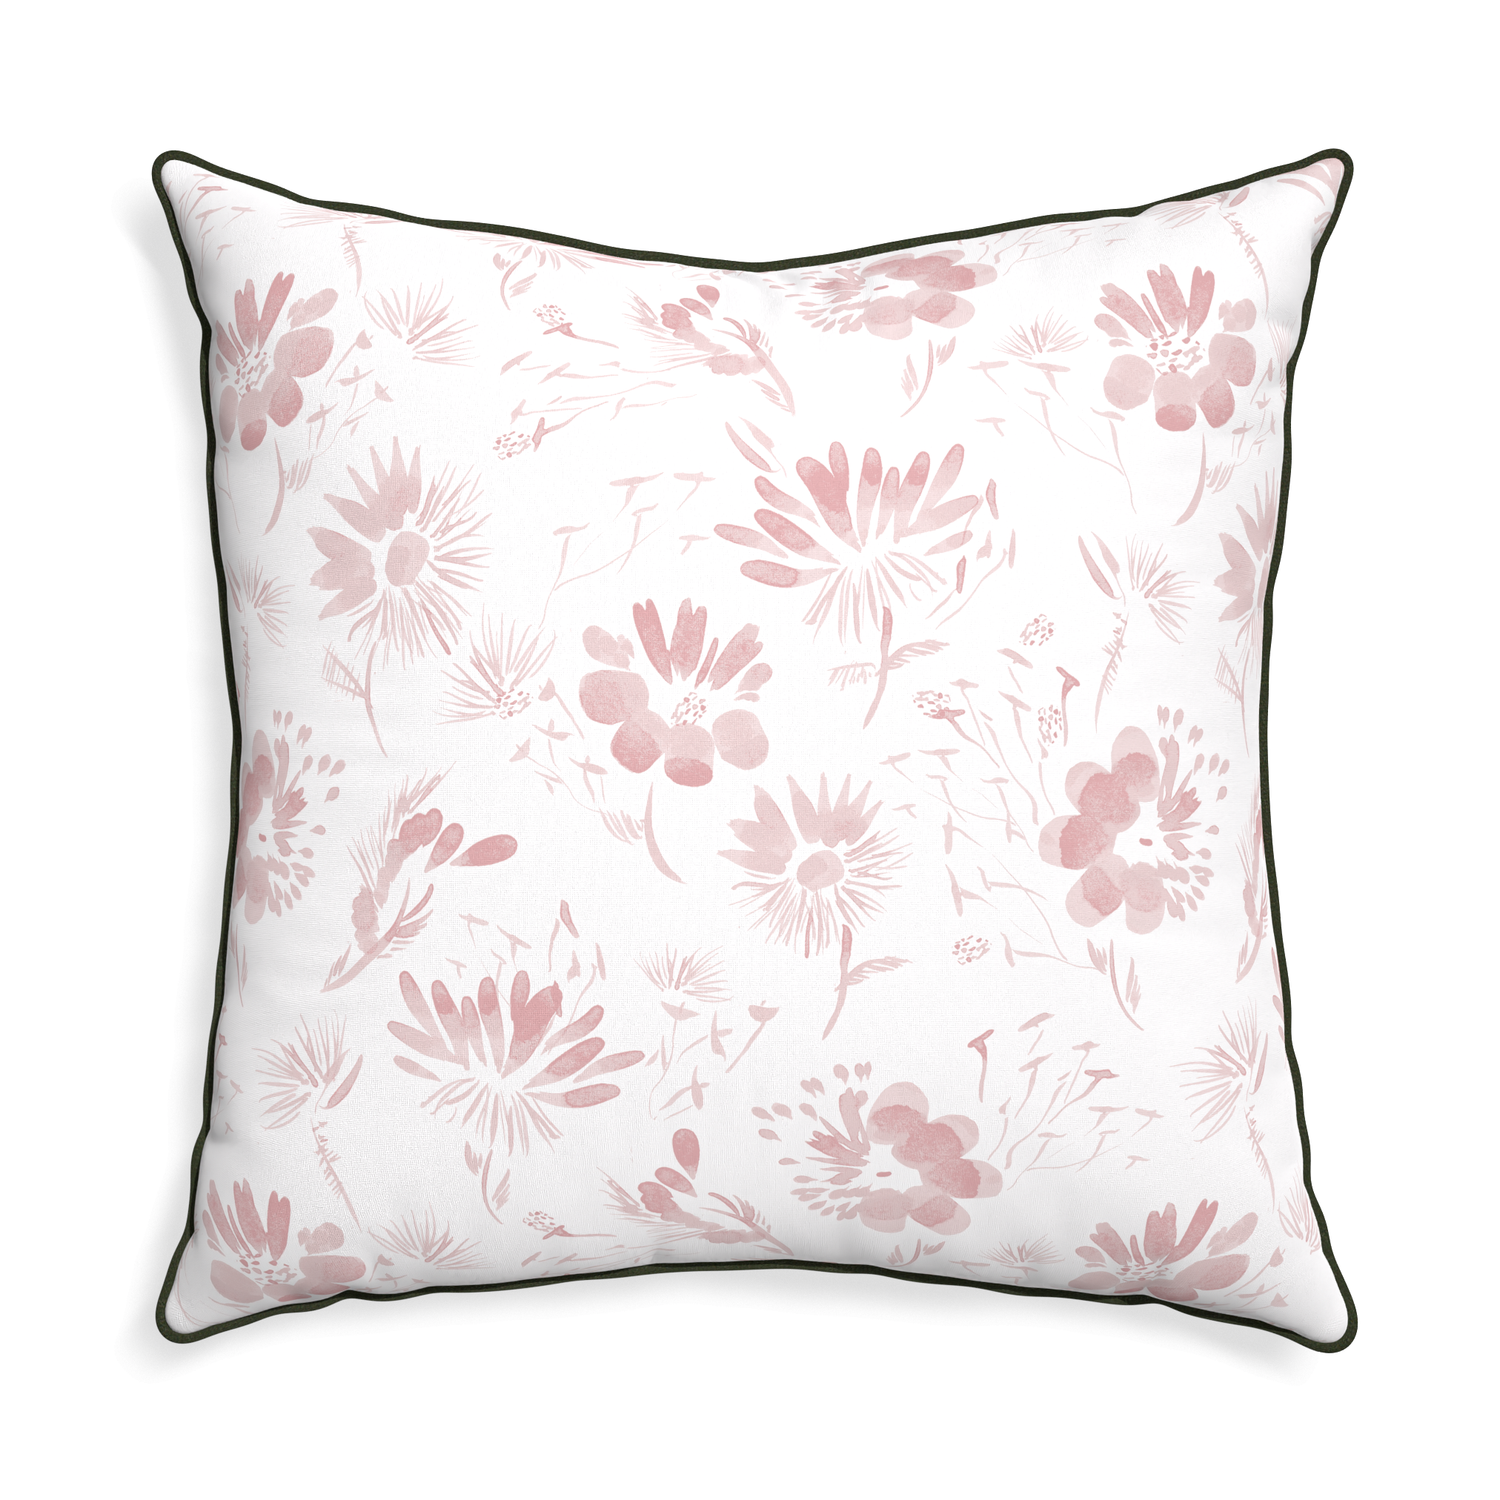 Euro-sham blake custom pink floralpillow with f piping on white background